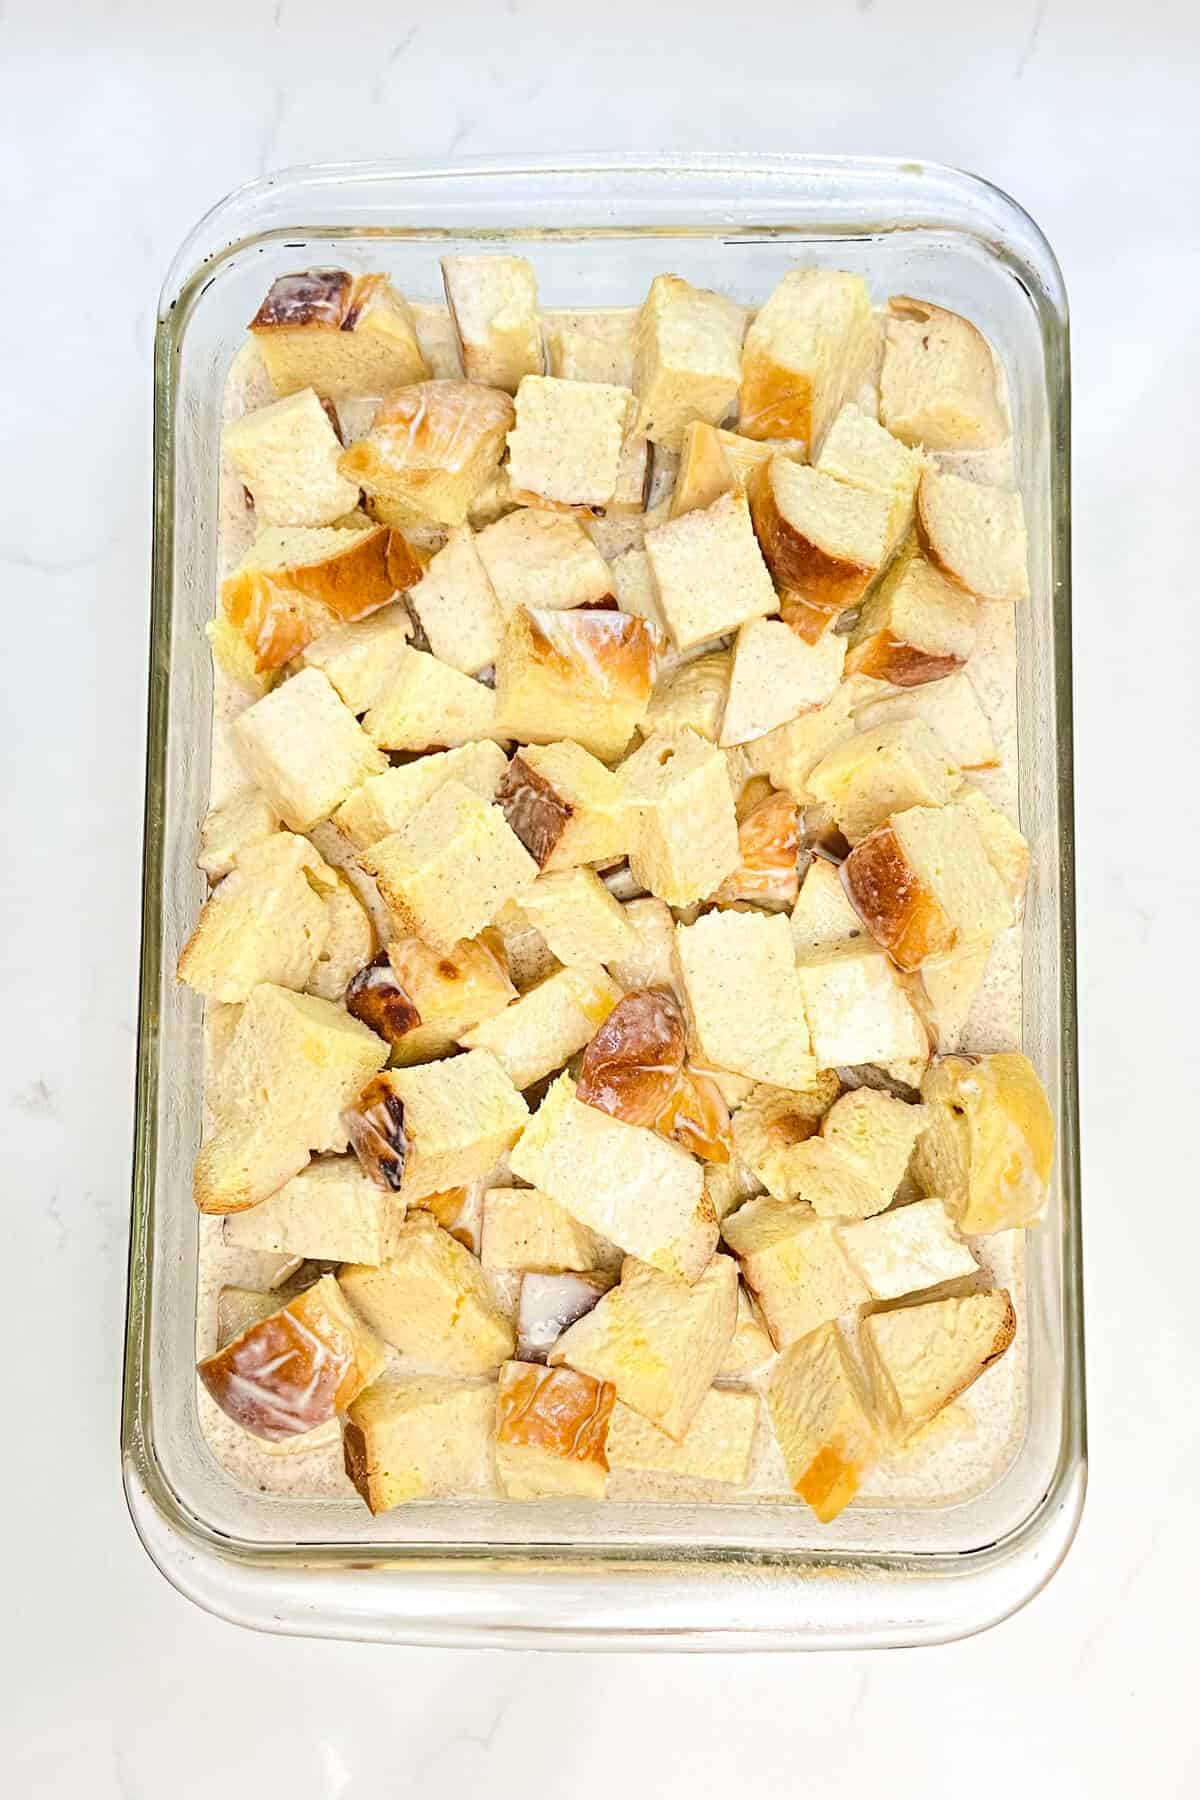 Cubed bread with milk mixture in pan.